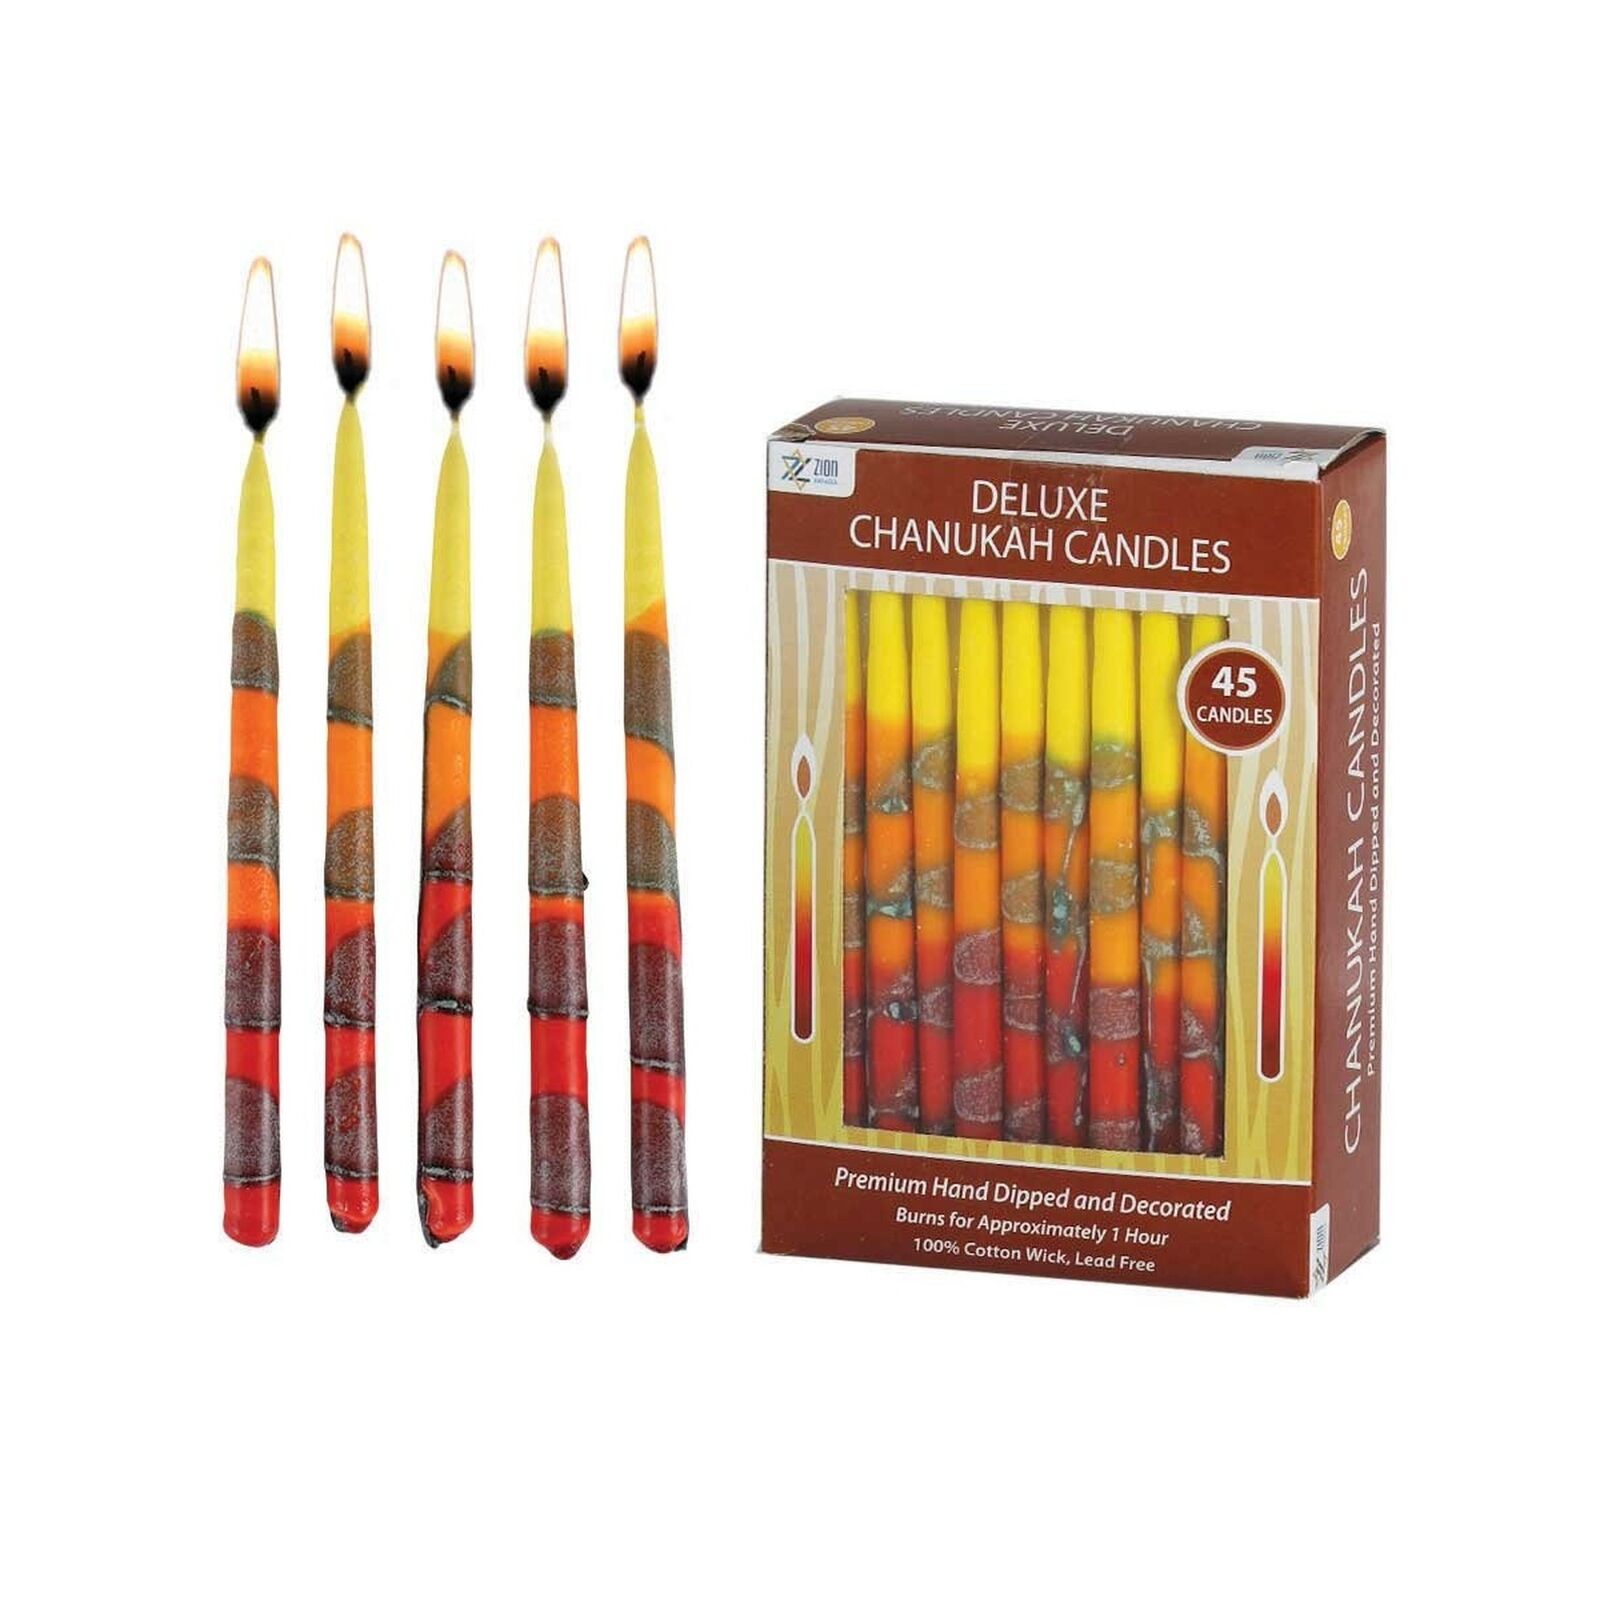 Deluxe Chanukah Candle Set Of 45 Hand Made Blaze Of Fire Thin Long Decorative...